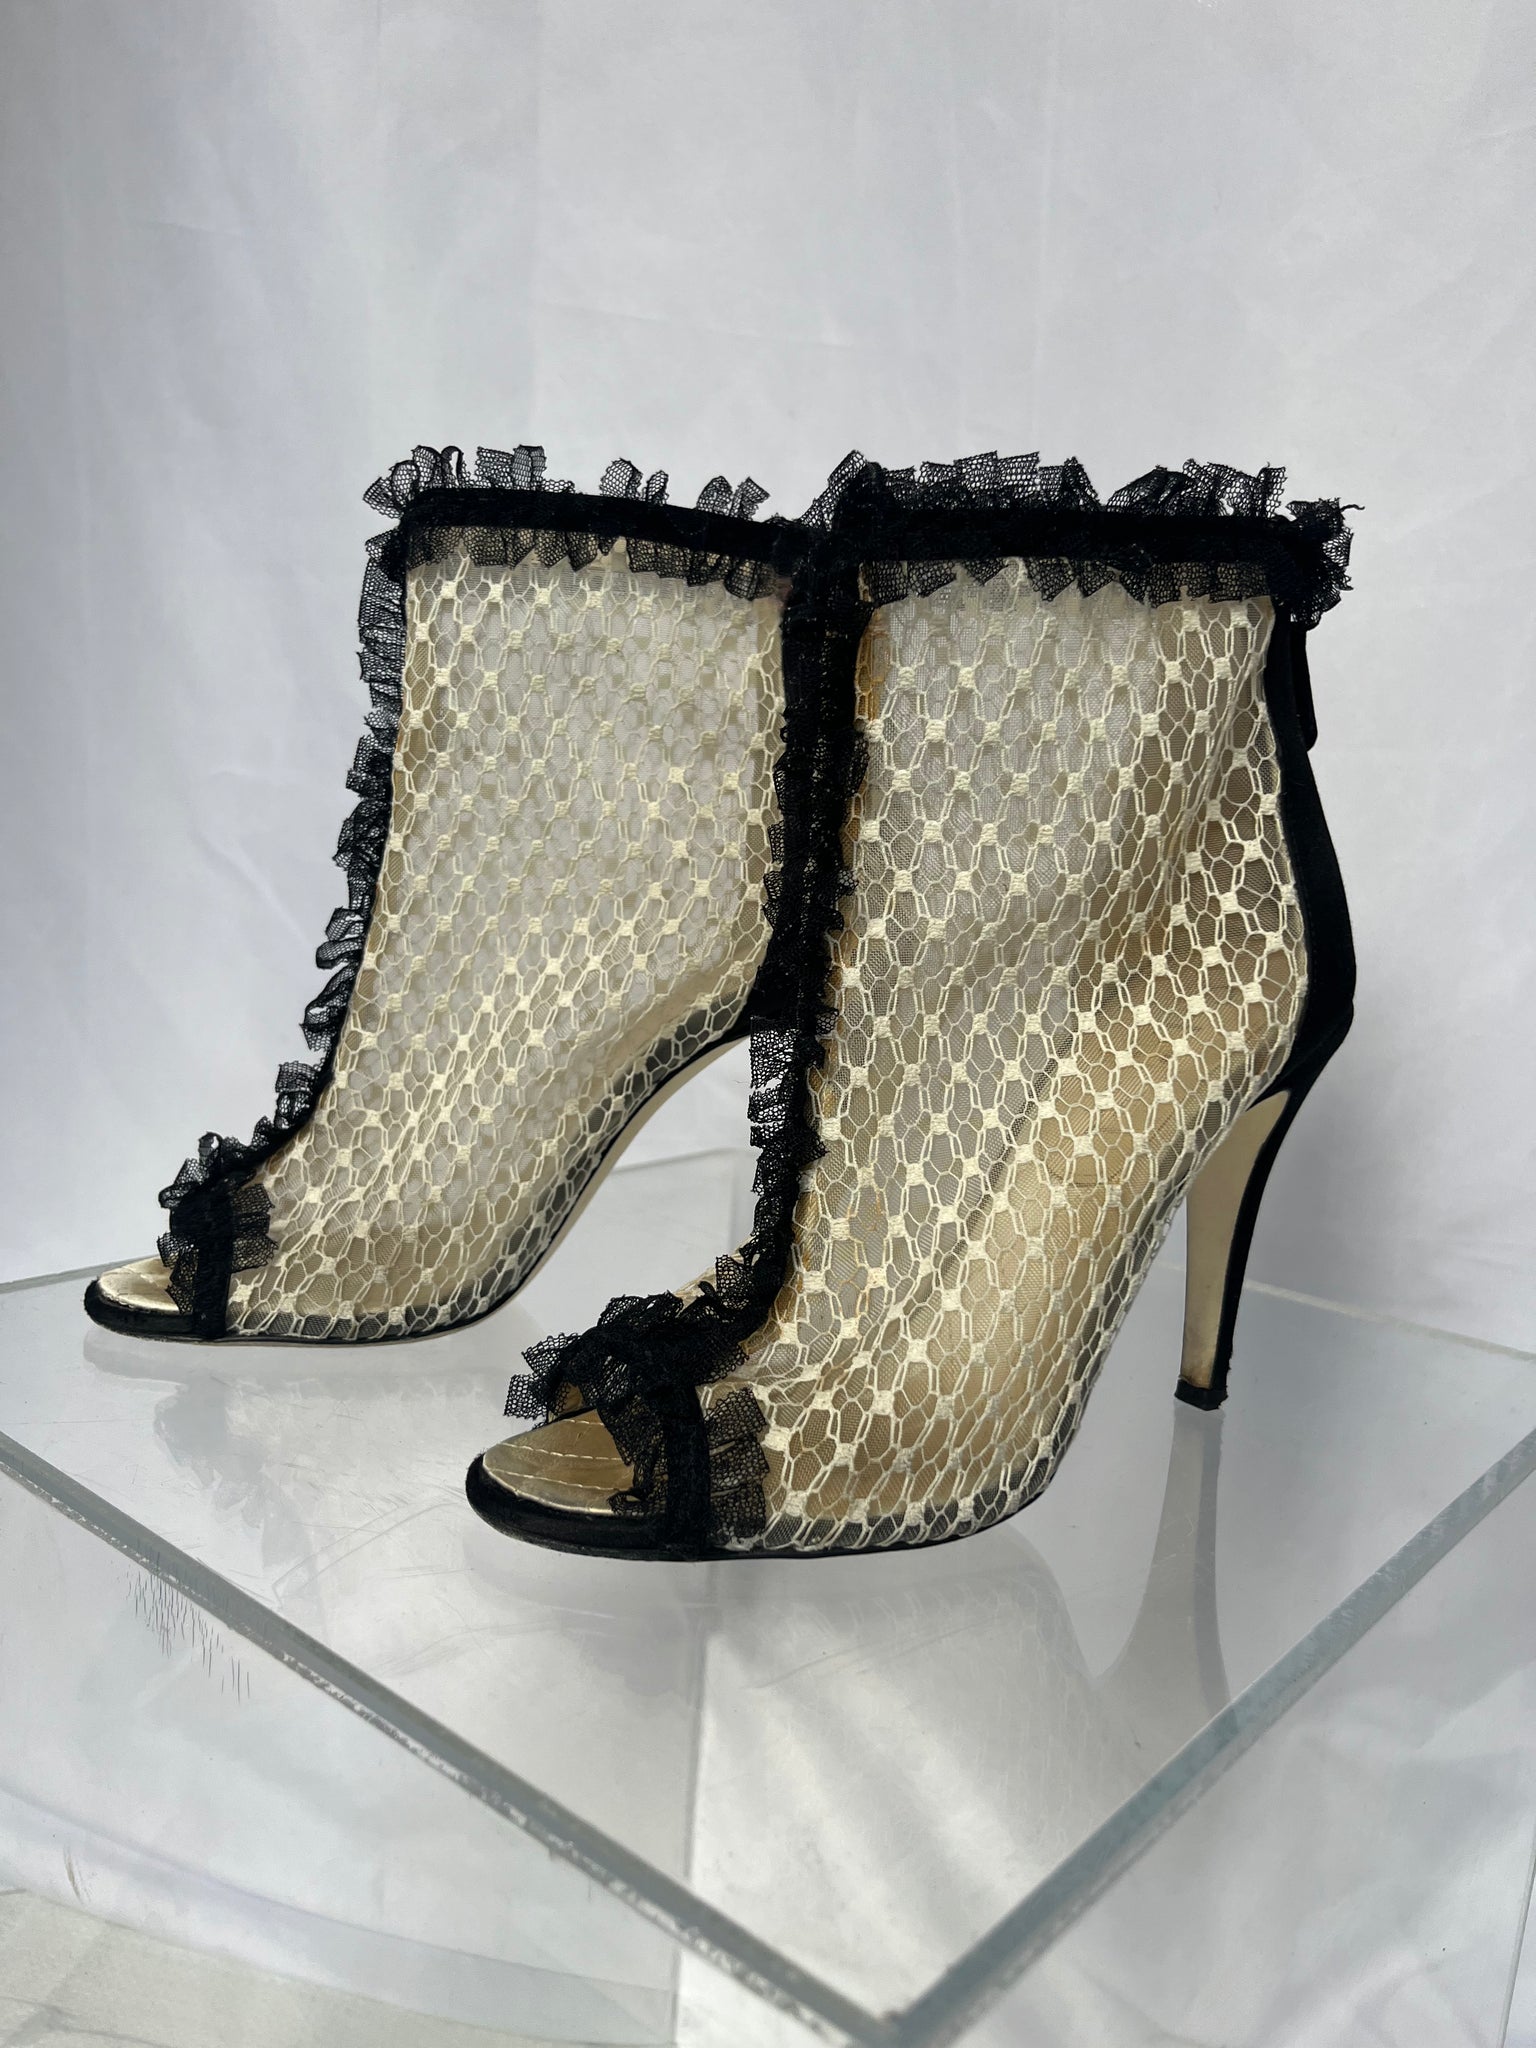 Chanel lace boot